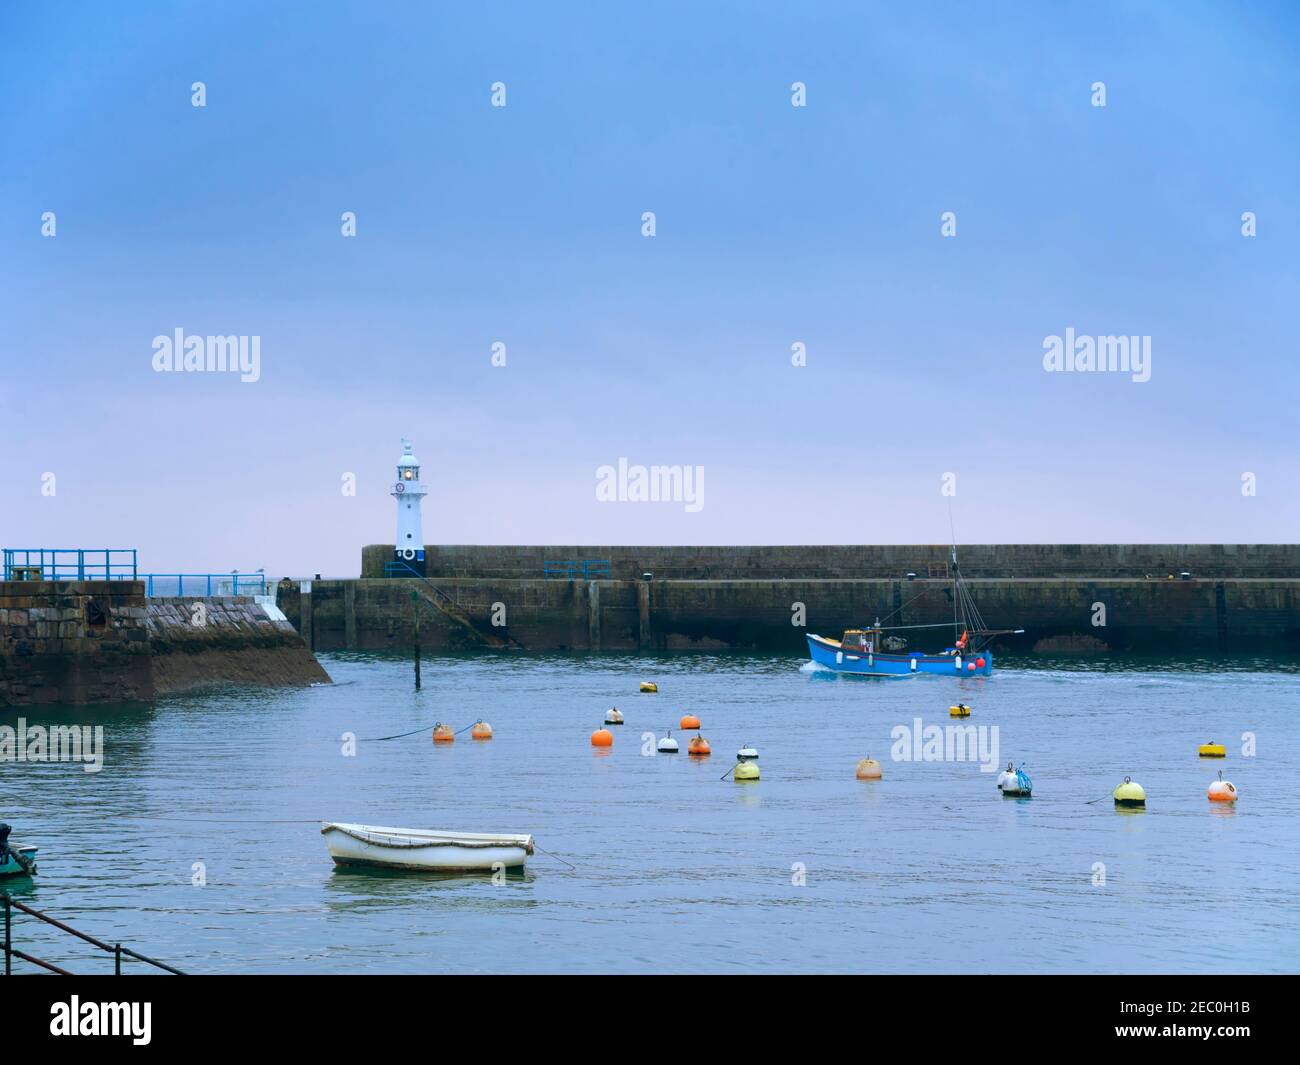 Mevagissey, Cornwall. A commercial fishing boat leaves the outer harbour at dusk. Stock Photo